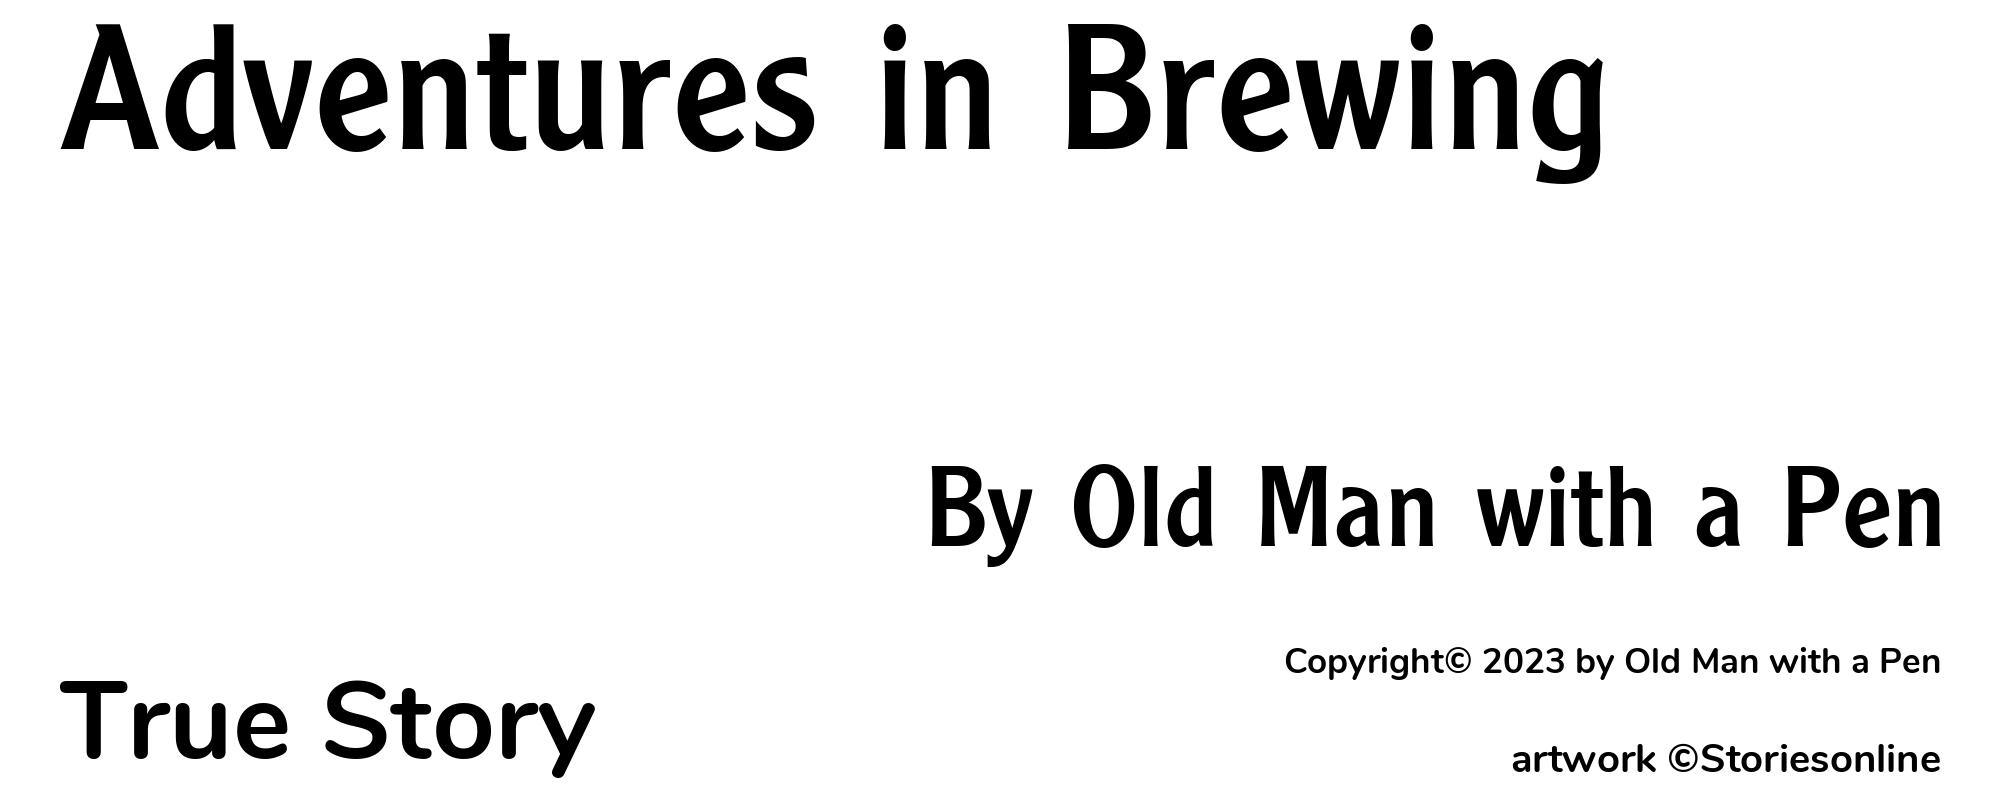 Adventures in Brewing - Cover